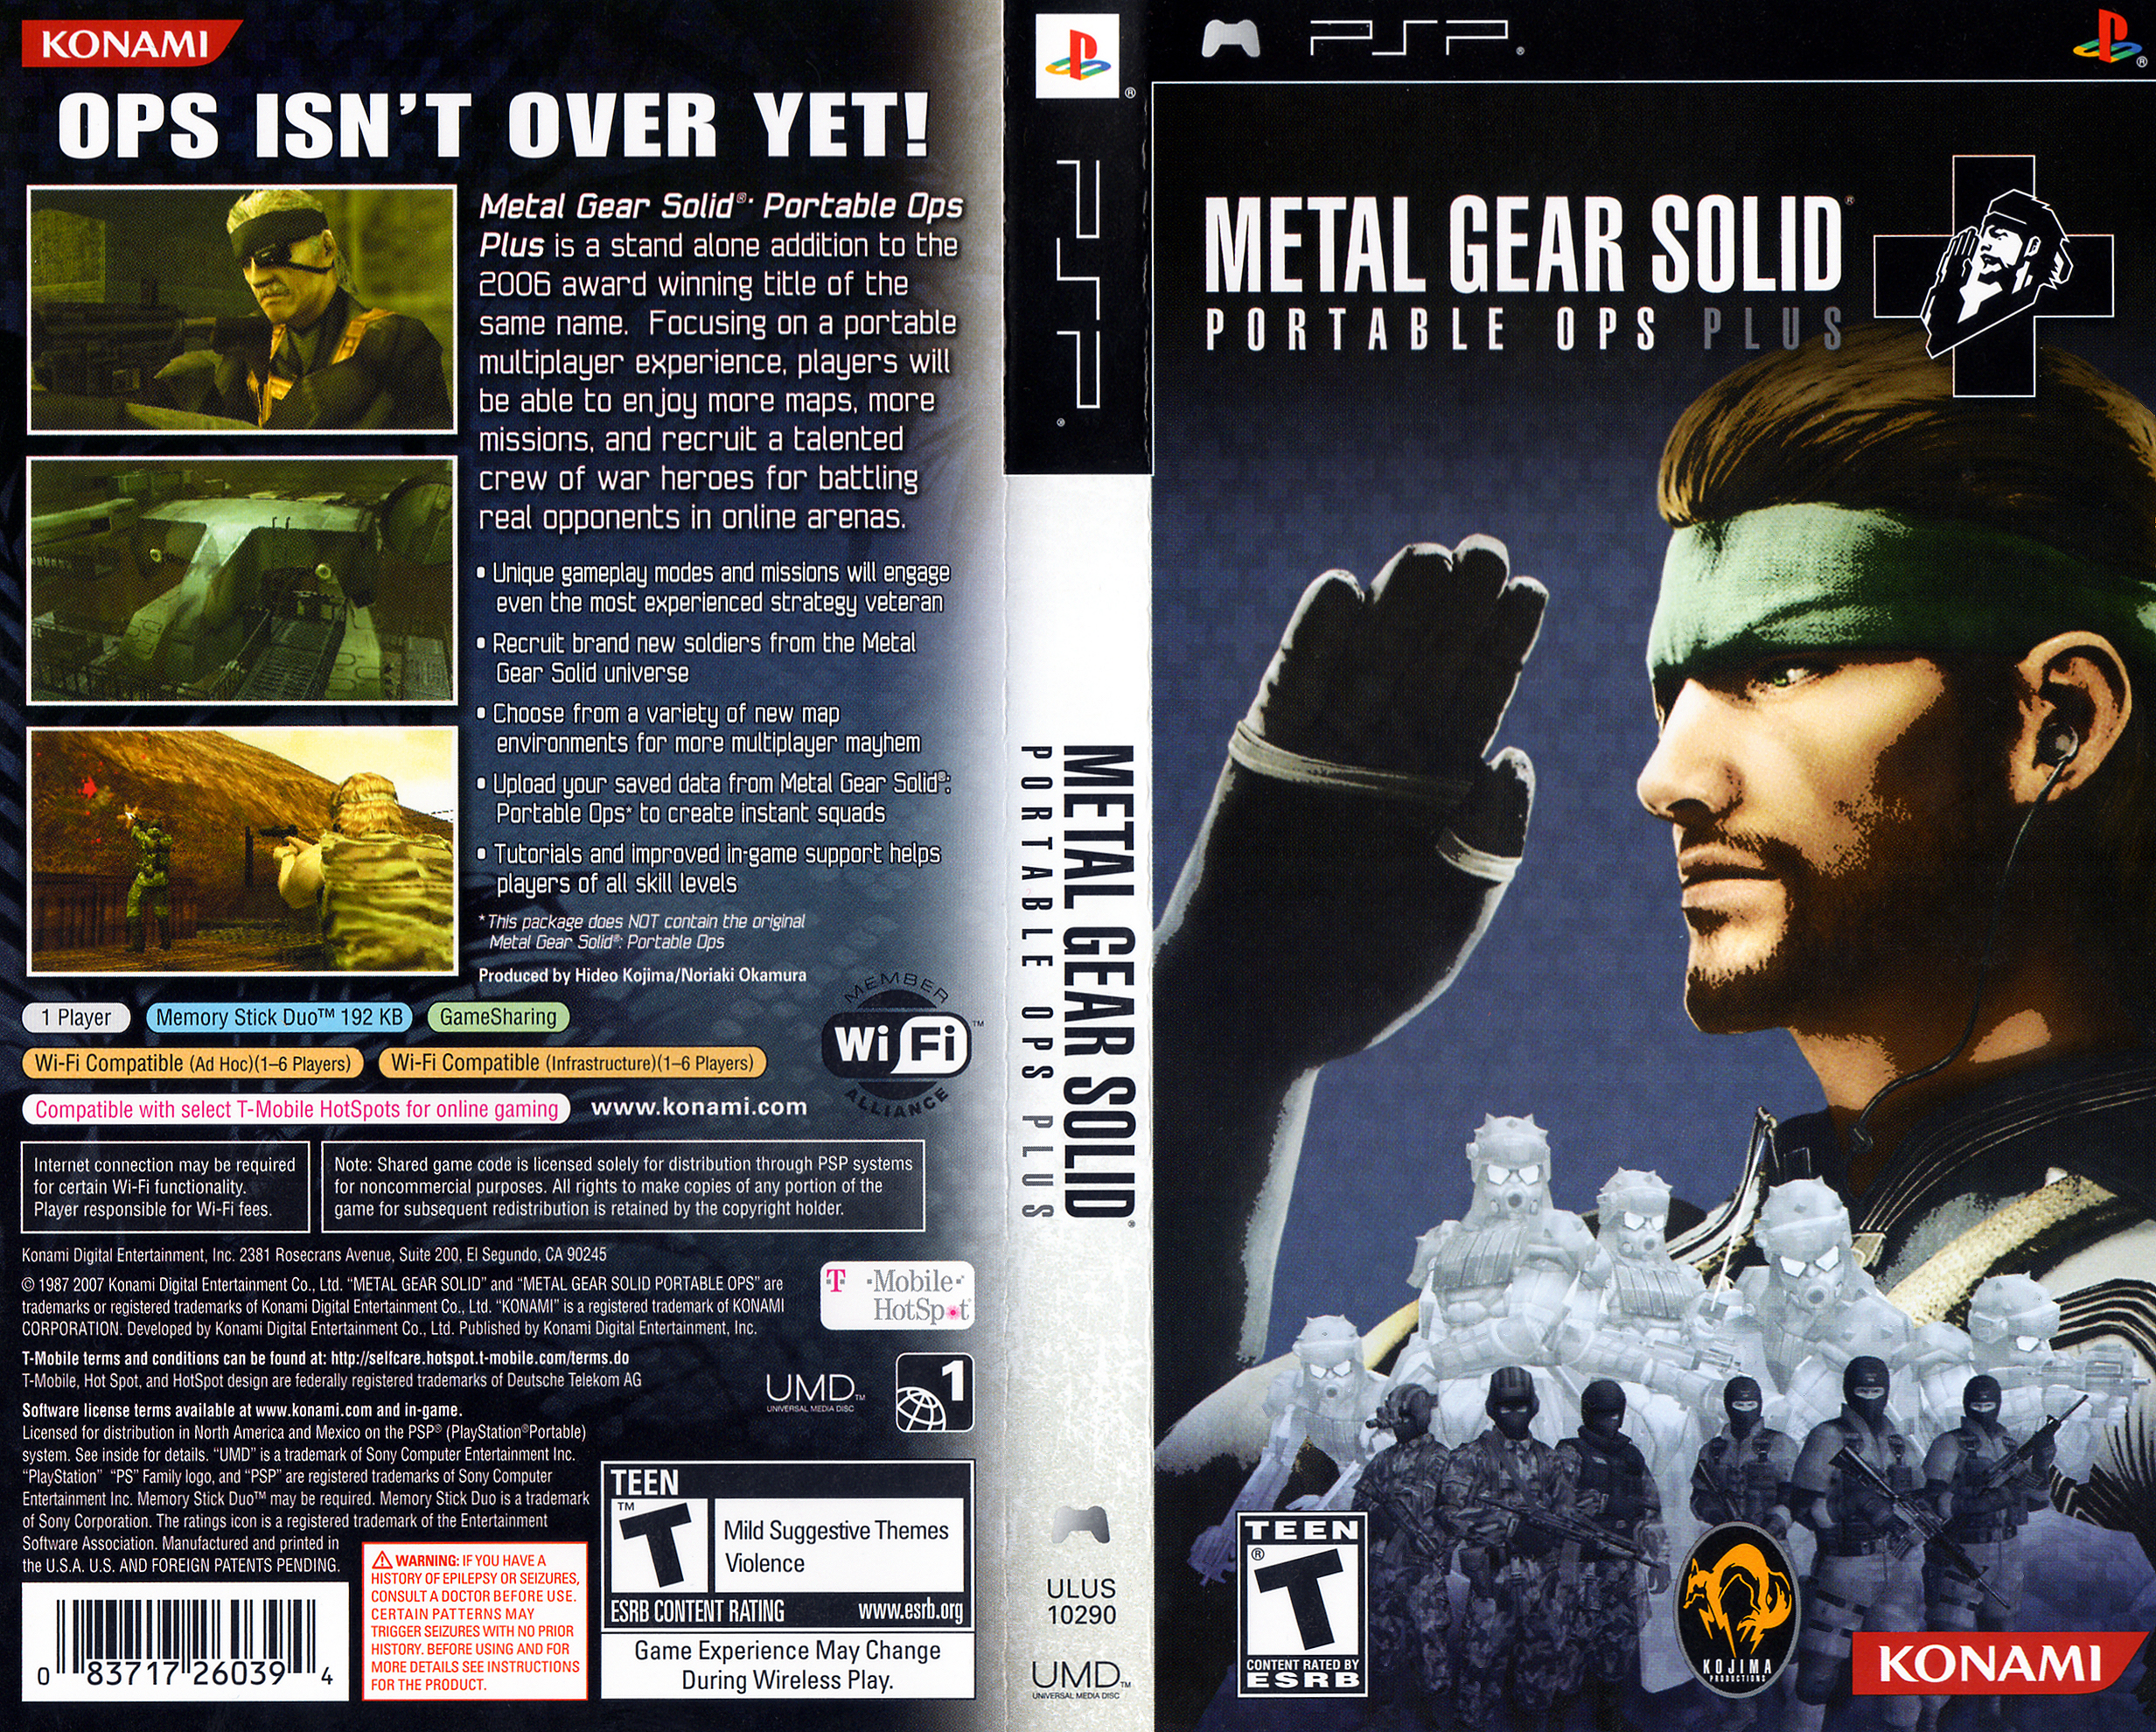 Metal Gear Solid Portable OPS Plus.